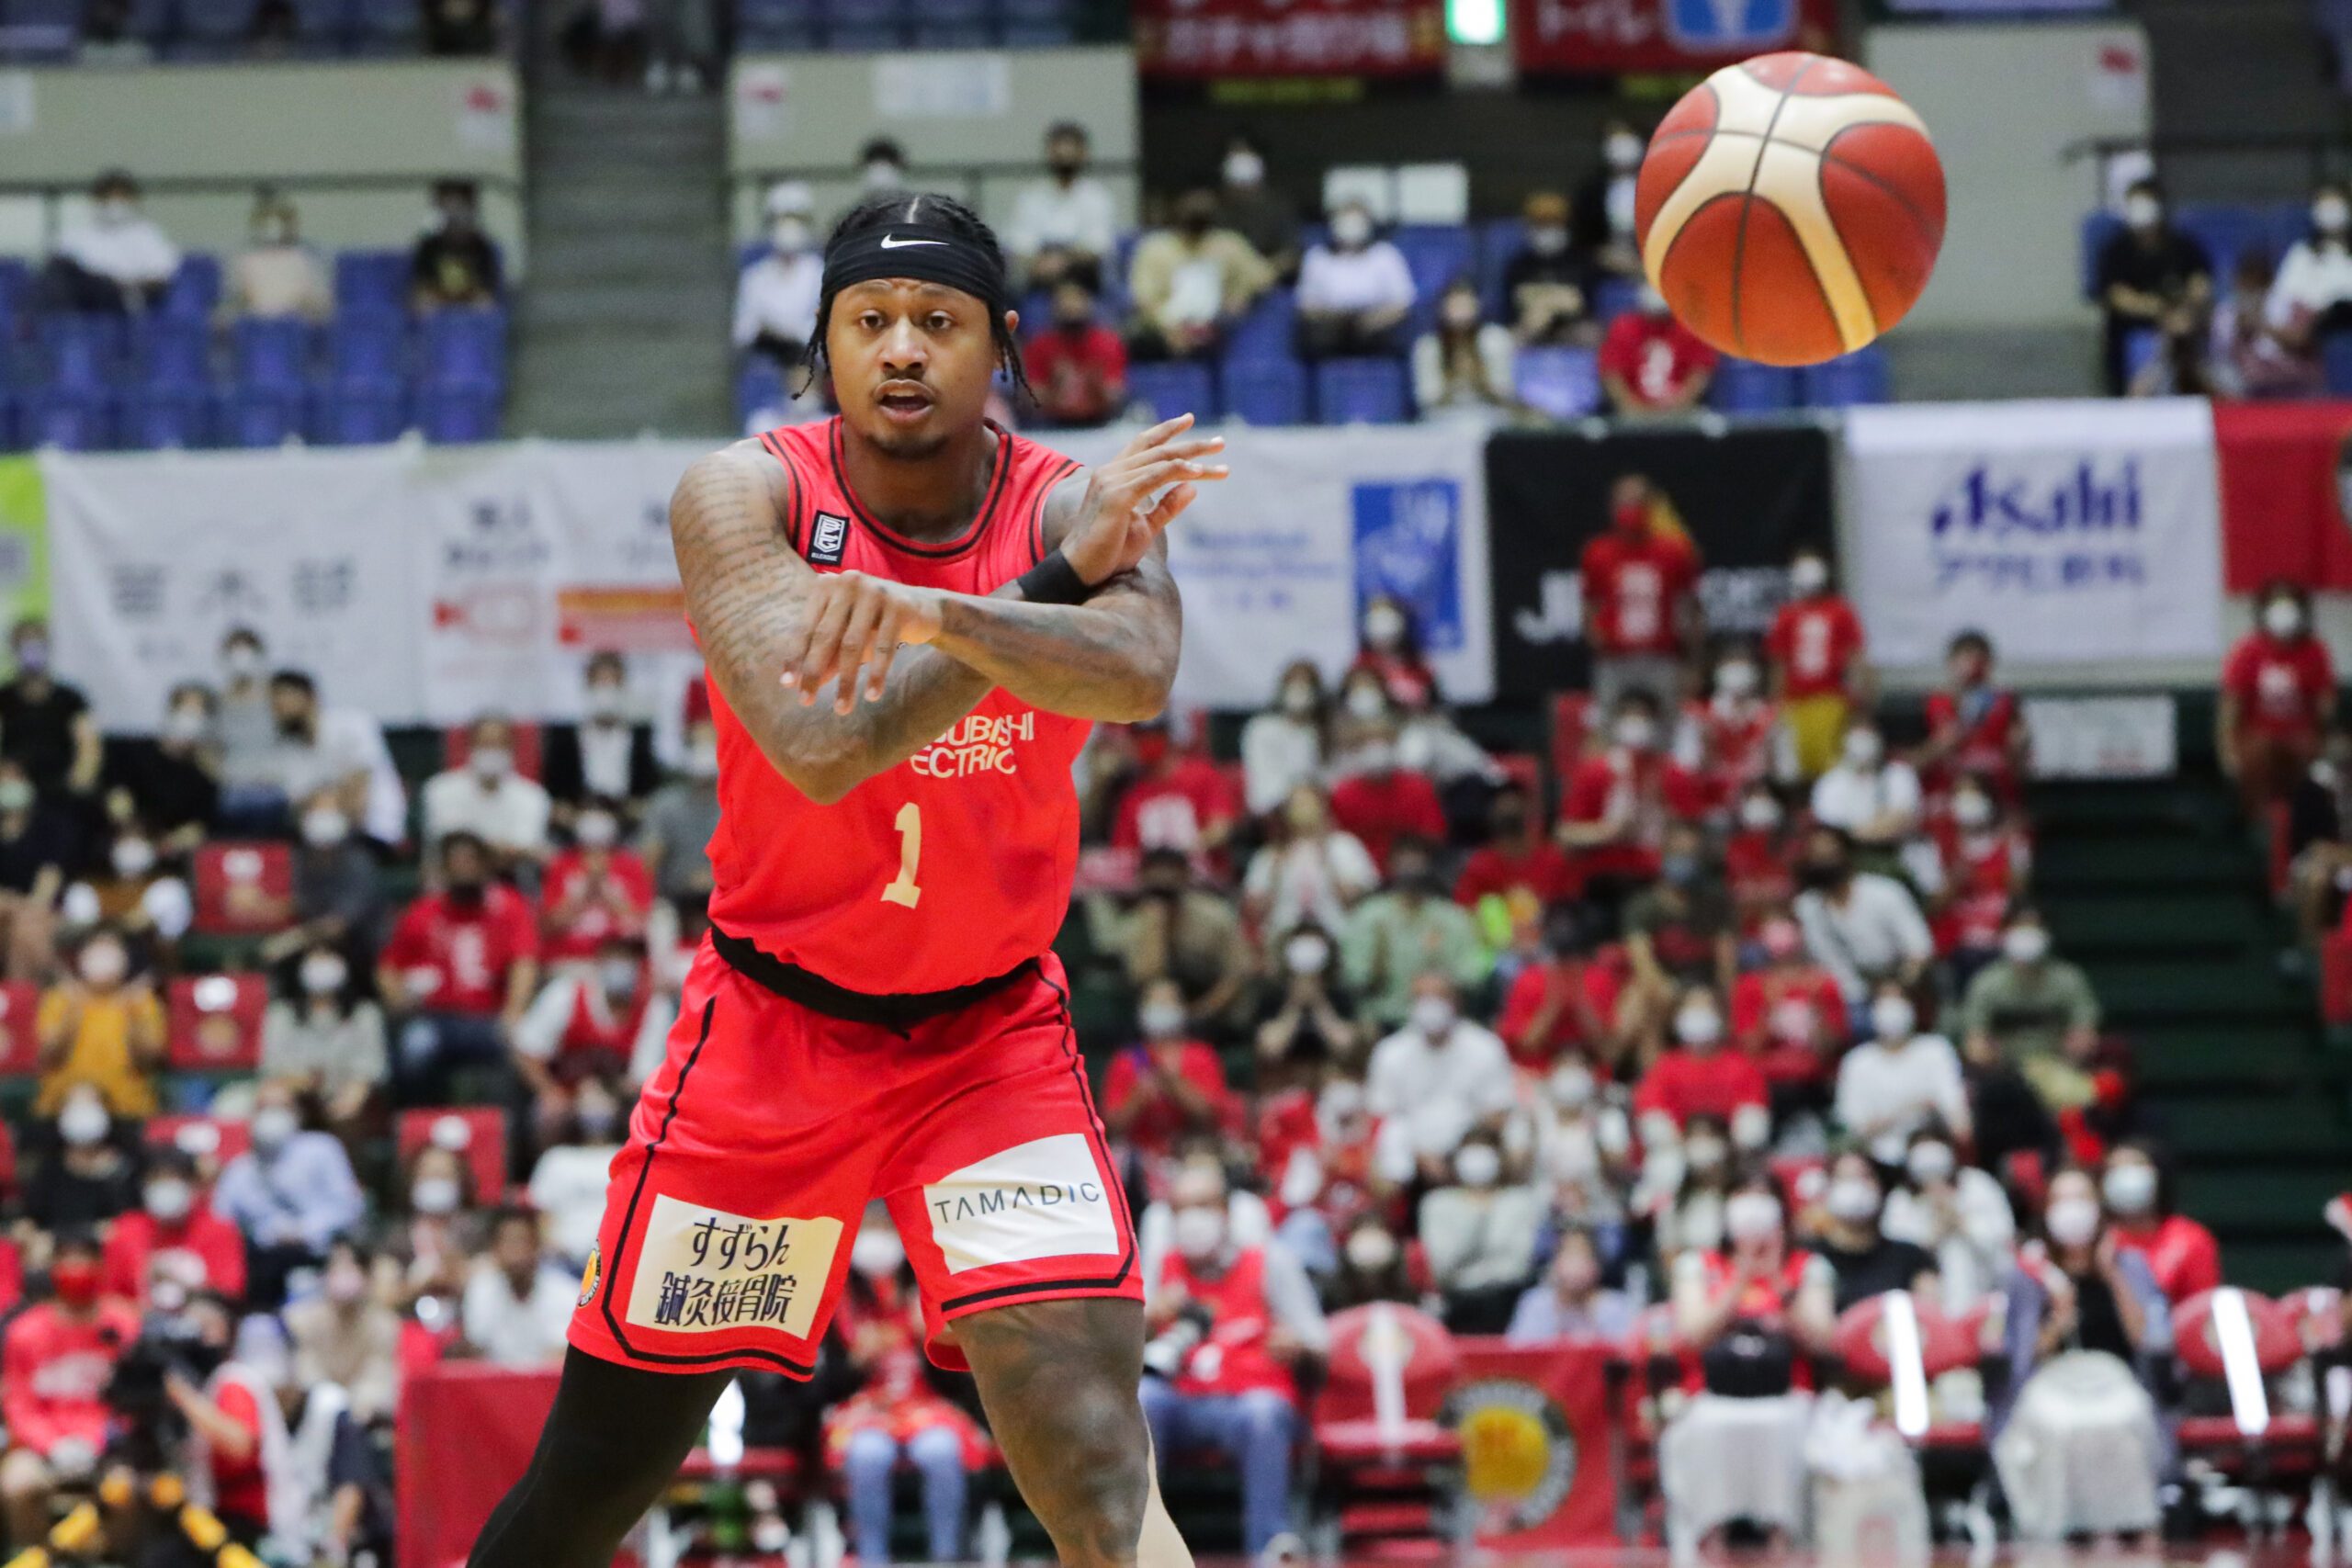 Parks catches fire early as Nagoya dominates Mikawa in Japan B. League opener